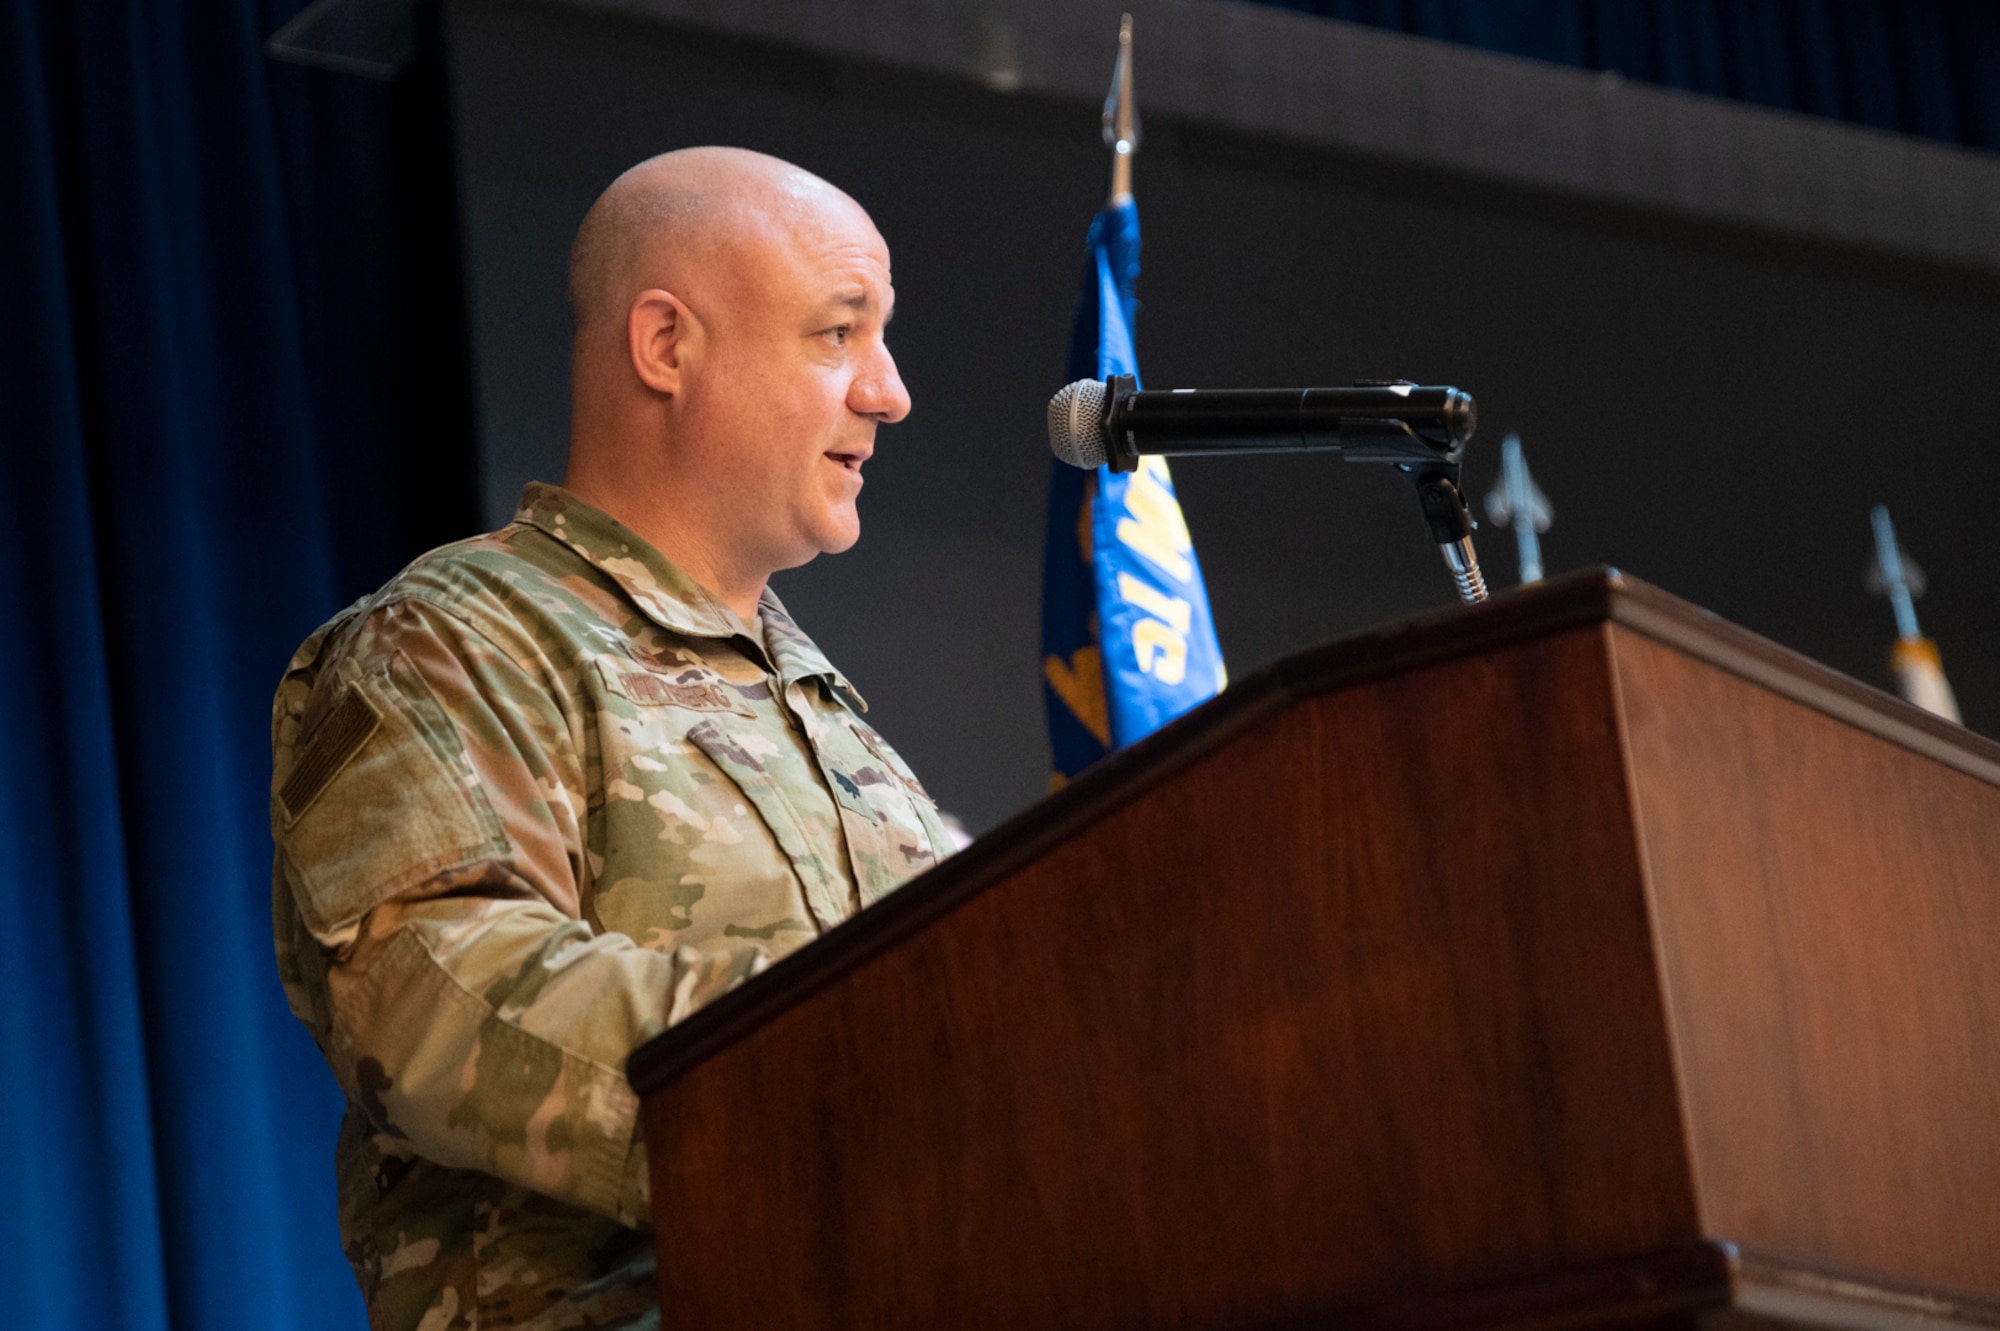 Lt. Col. Marc Rittberg, 51st Medical Support Squadron (MDSS) commander, delivers his acceptance speech as the newly-appointed MDSS commander